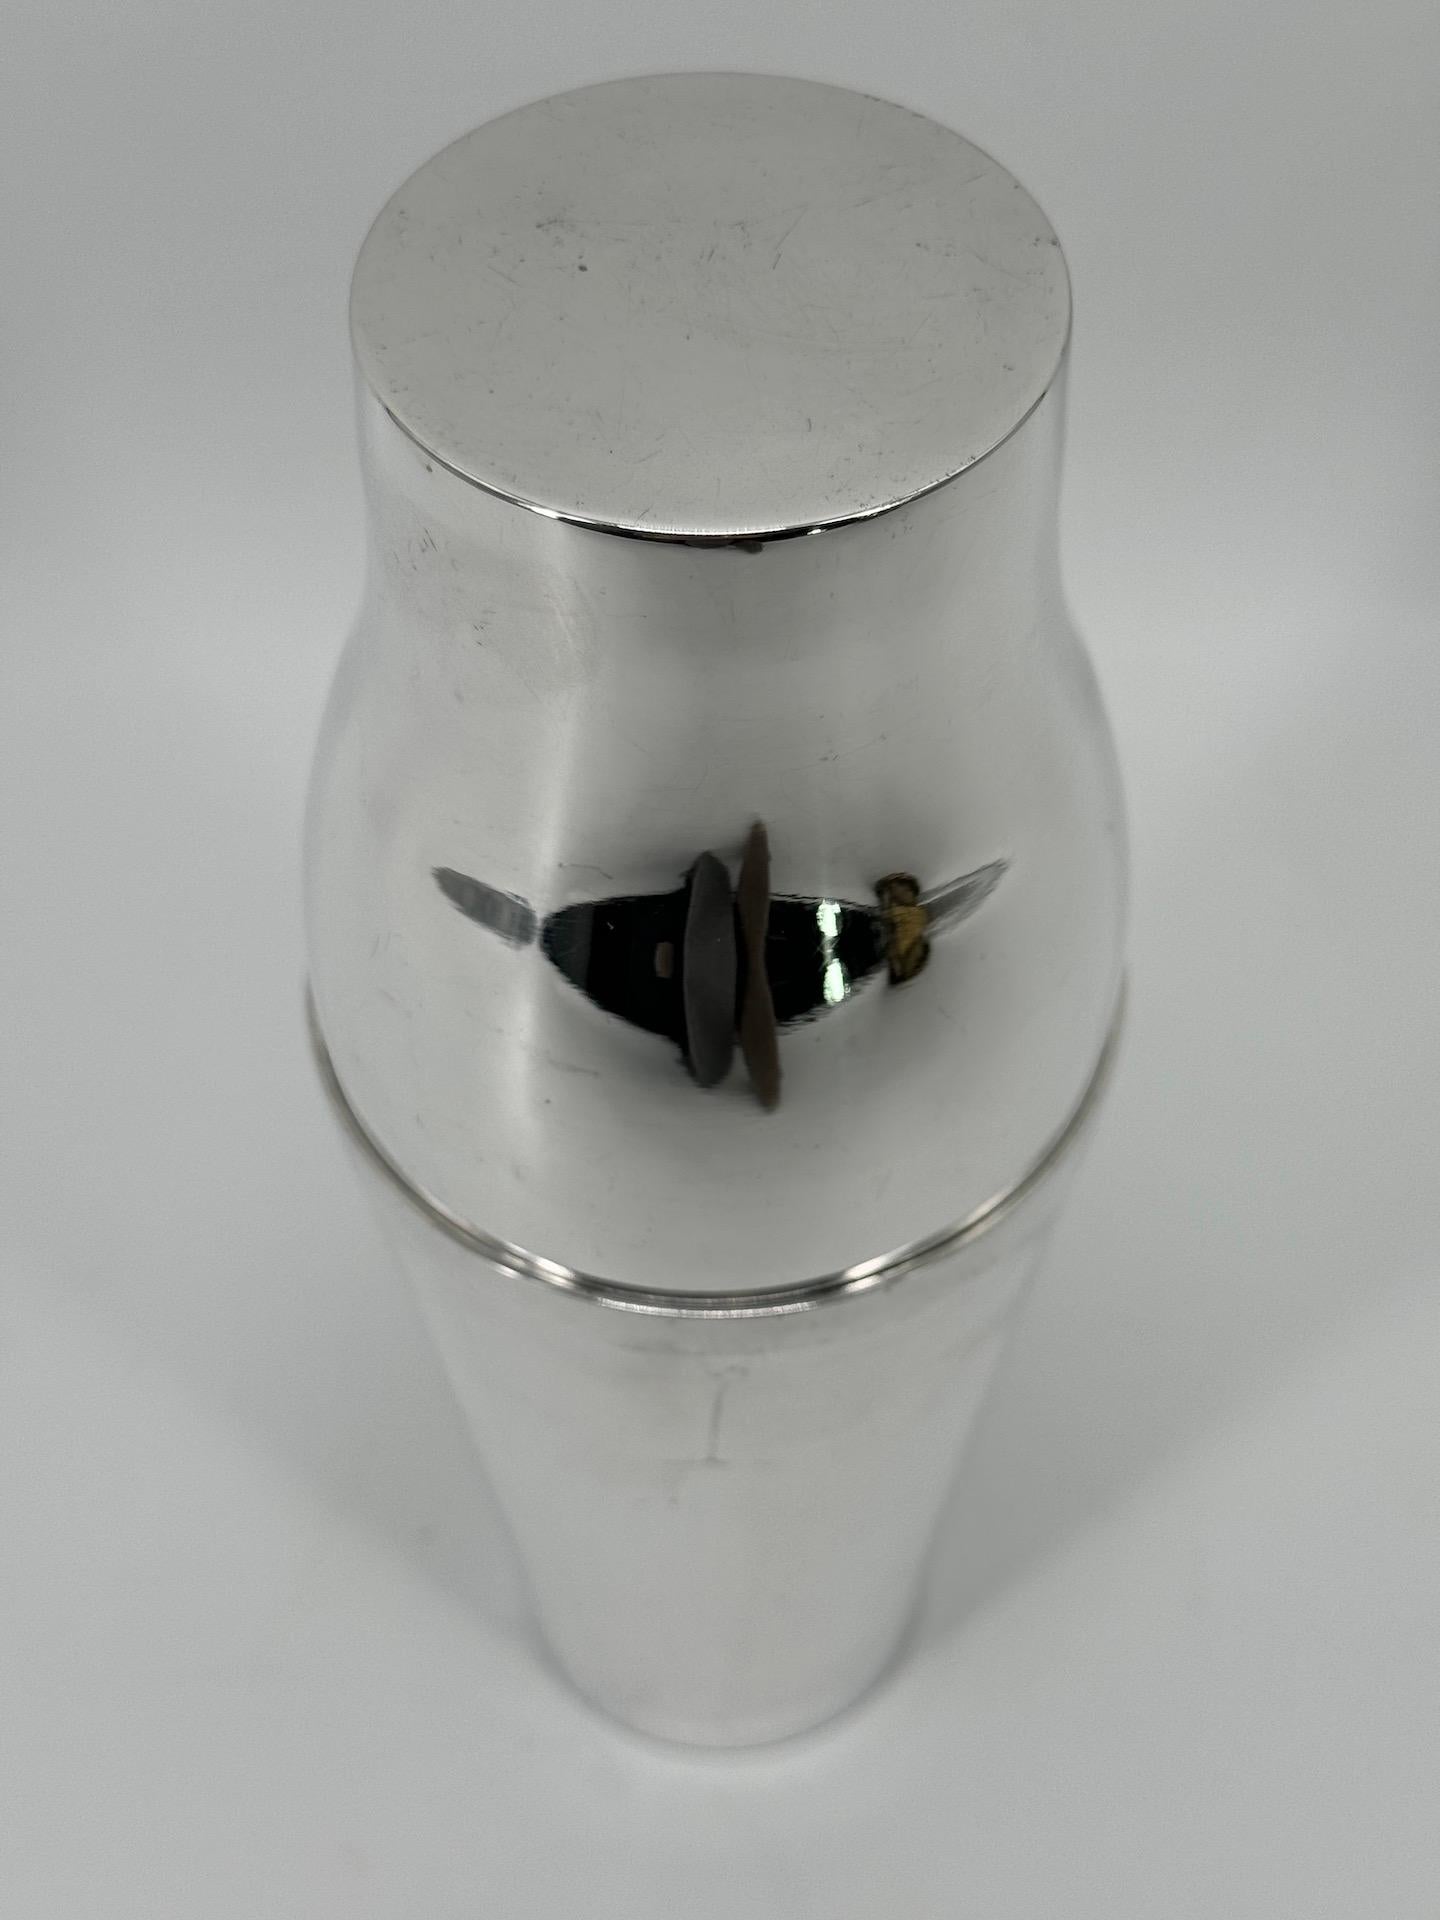 Art Deco French Silver Plated Shaker In the Taste of Christofle

A large and elegant silver-plated metal shaker with a smooth aspect and sleek shape. 
Christofle made an identical model.

Perfectly tight when closed and in very nice condition for